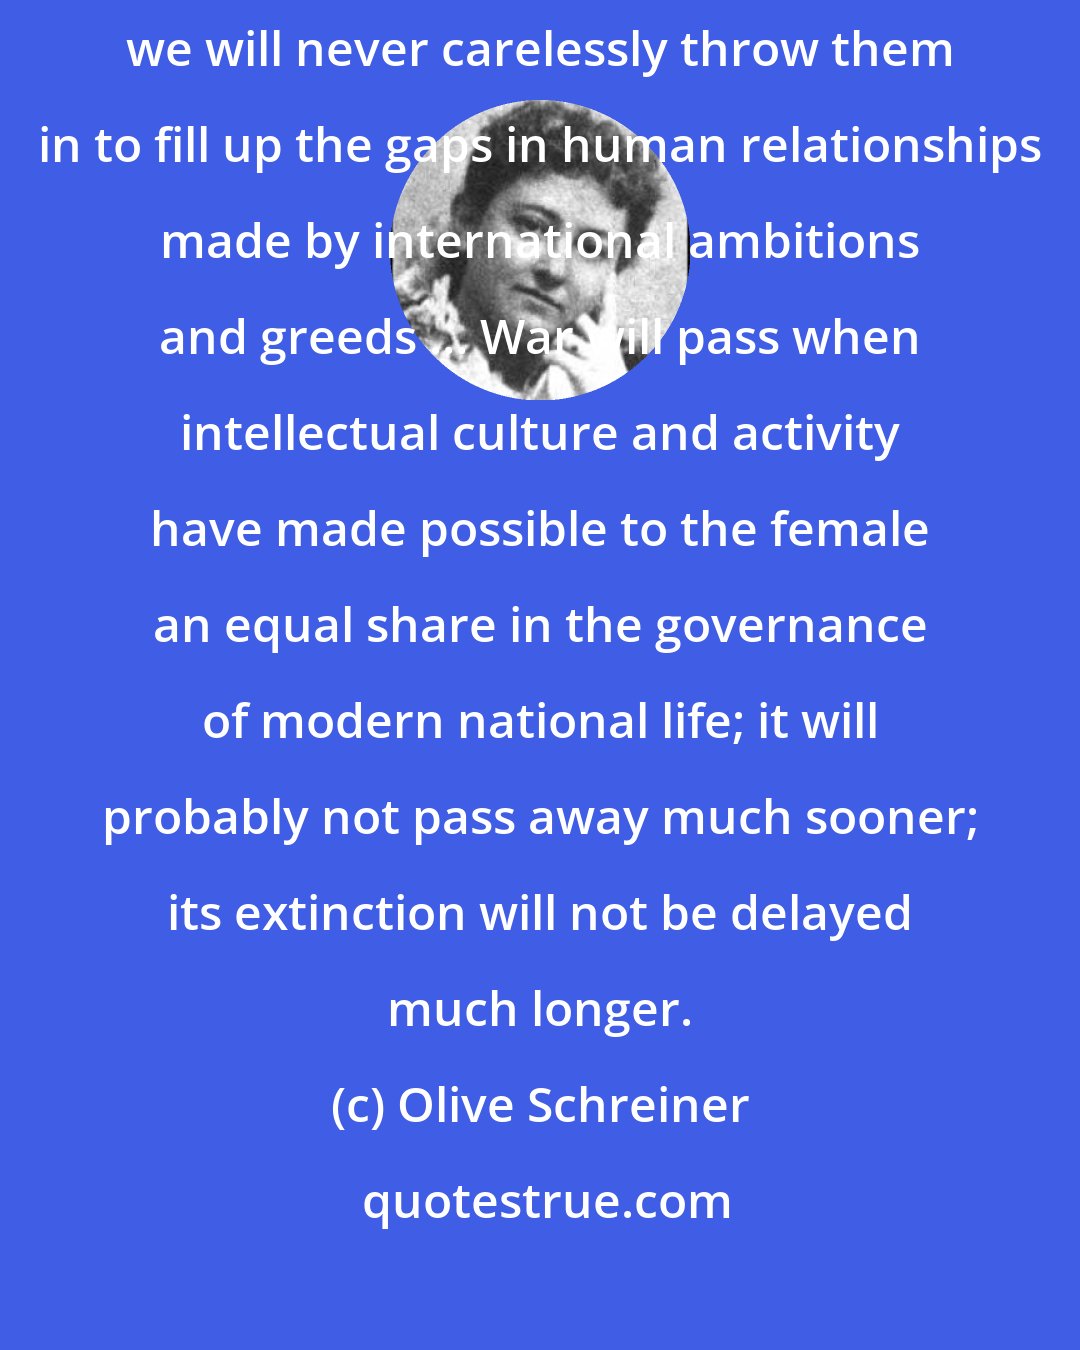 Olive Schreiner: Men's bodies are our women's works of art. Given to us power of control, we will never carelessly throw them in to fill up the gaps in human relationships made by international ambitions and greeds ... War will pass when intellectual culture and activity have made possible to the female an equal share in the governance of modern national life; it will probably not pass away much sooner; its extinction will not be delayed much longer.